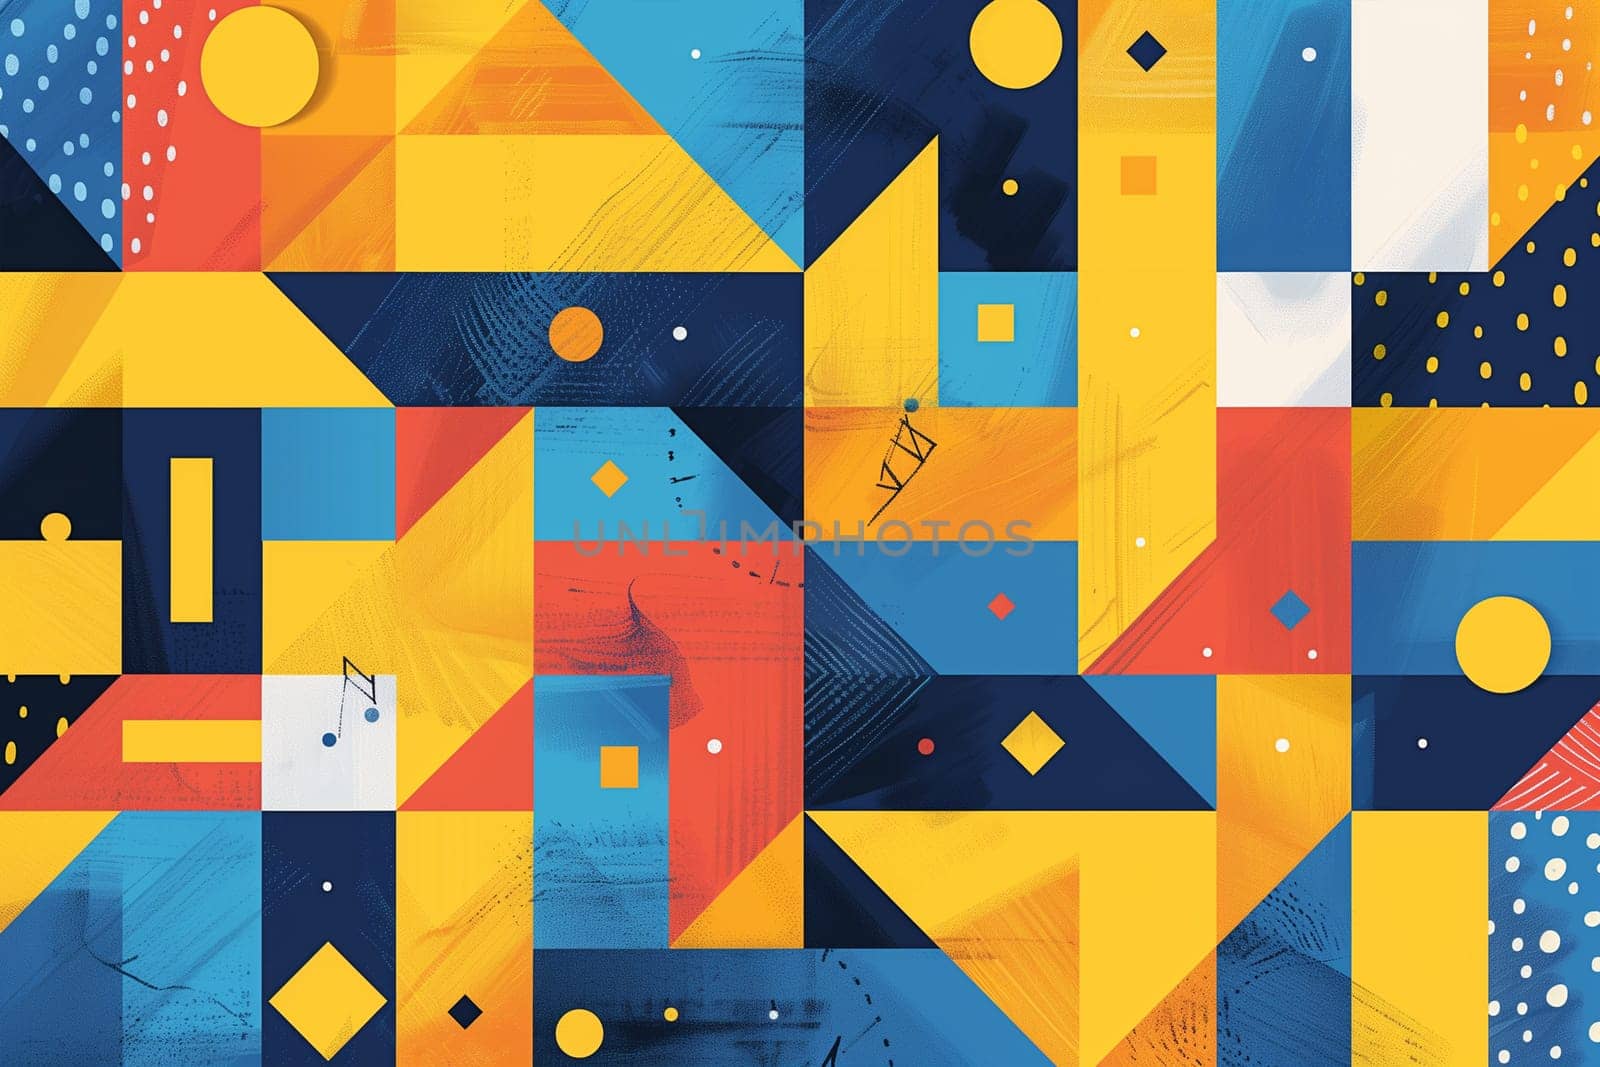 Vivid abstract background featuring various circles and squares in a multitude of bright colors and sizes.